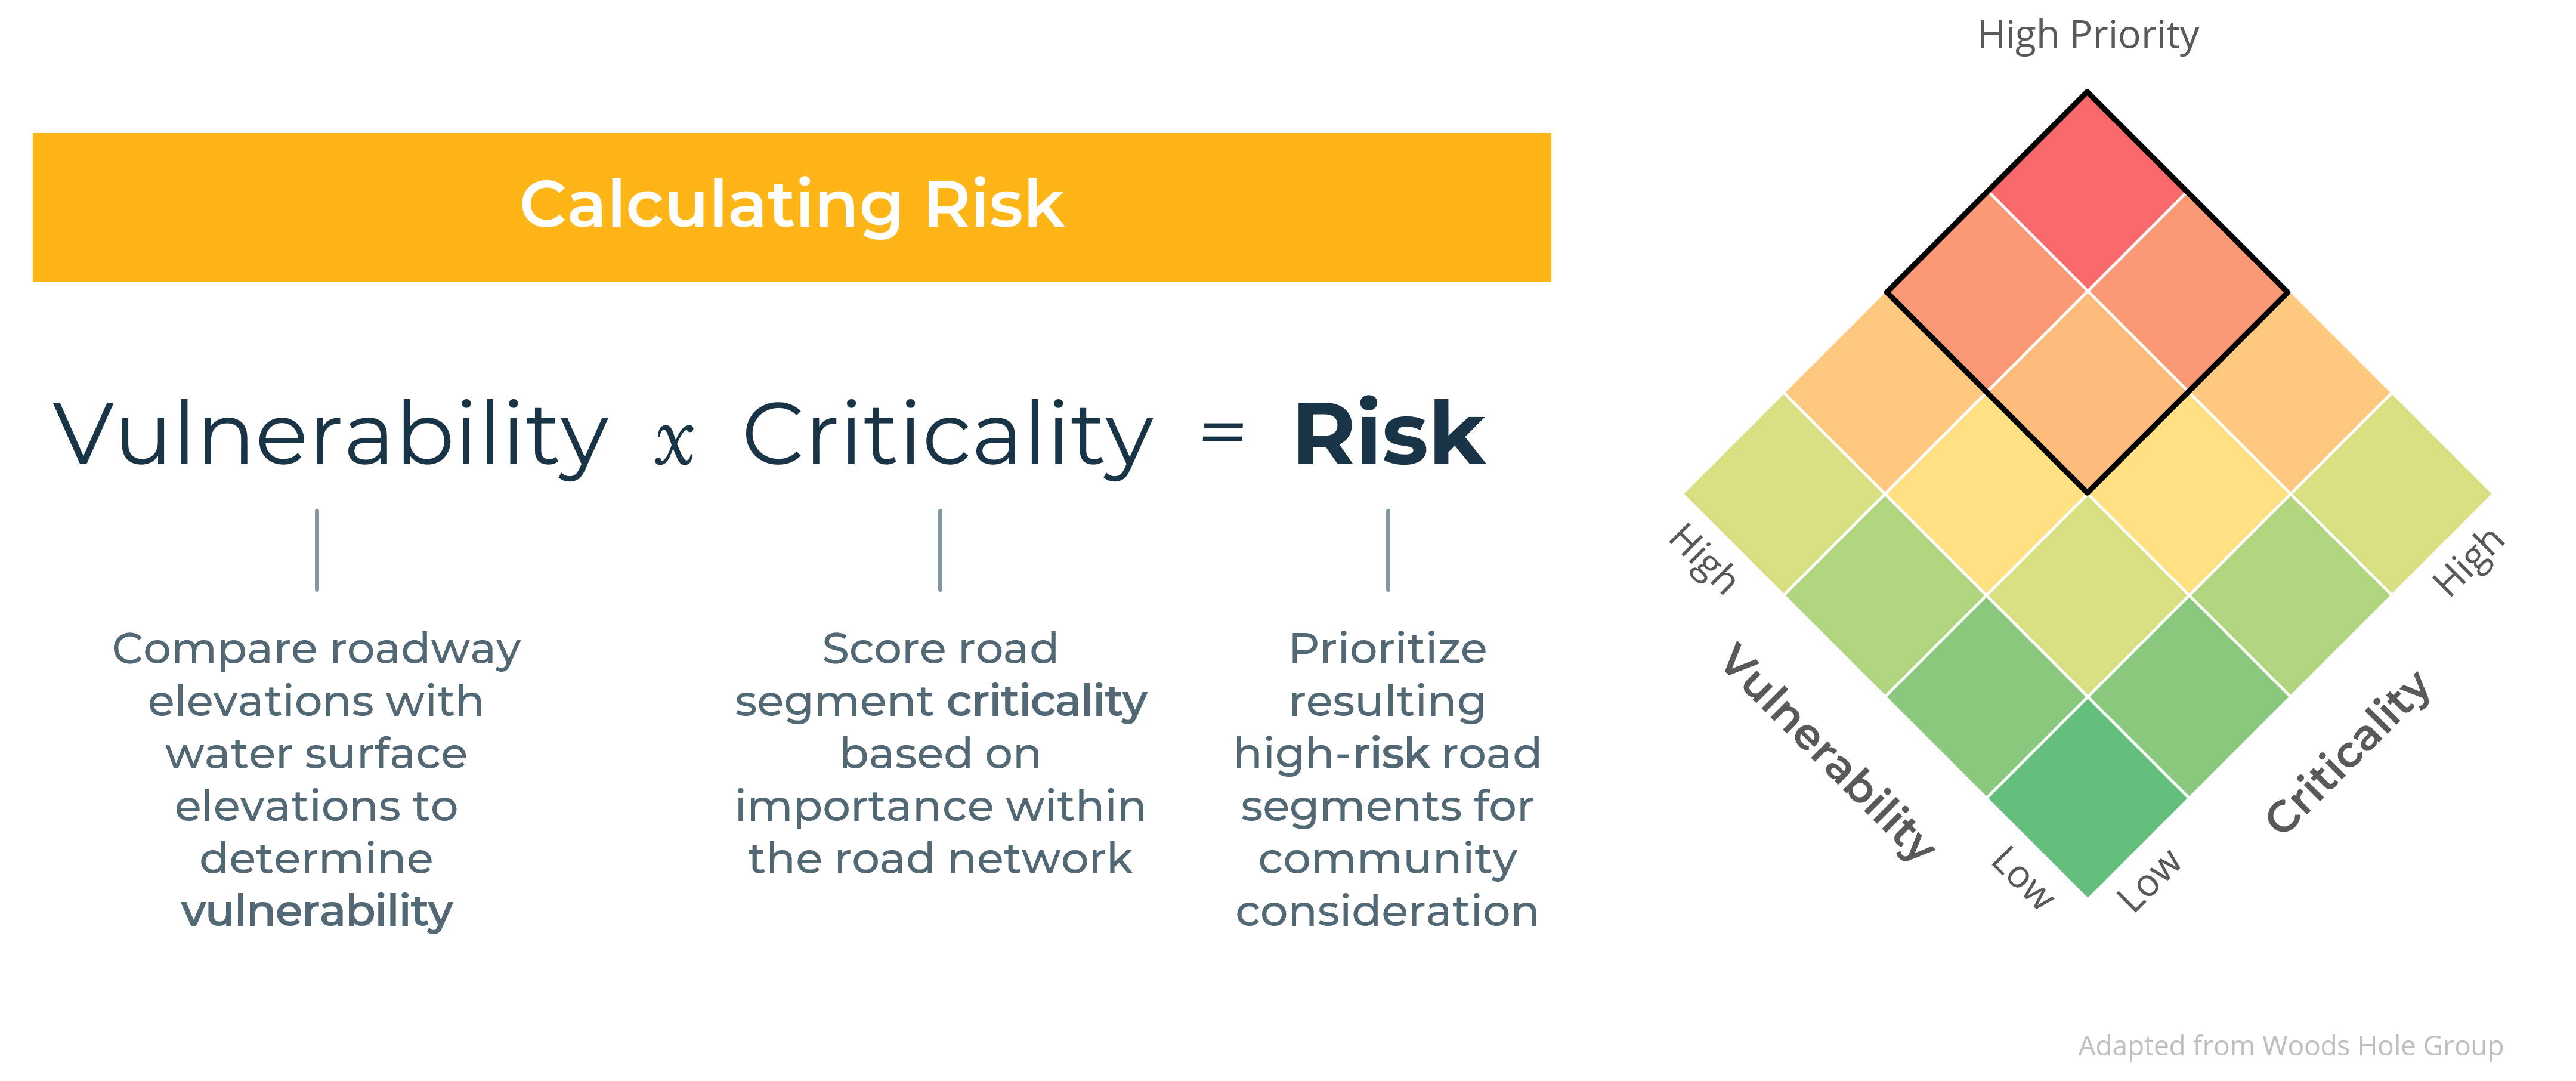  Risk is calculated using vulnerability multiplied by criticality. High criticality and high vulnerability produce a high risk and high priority, while low vulnerability and low criticality produce low risk.